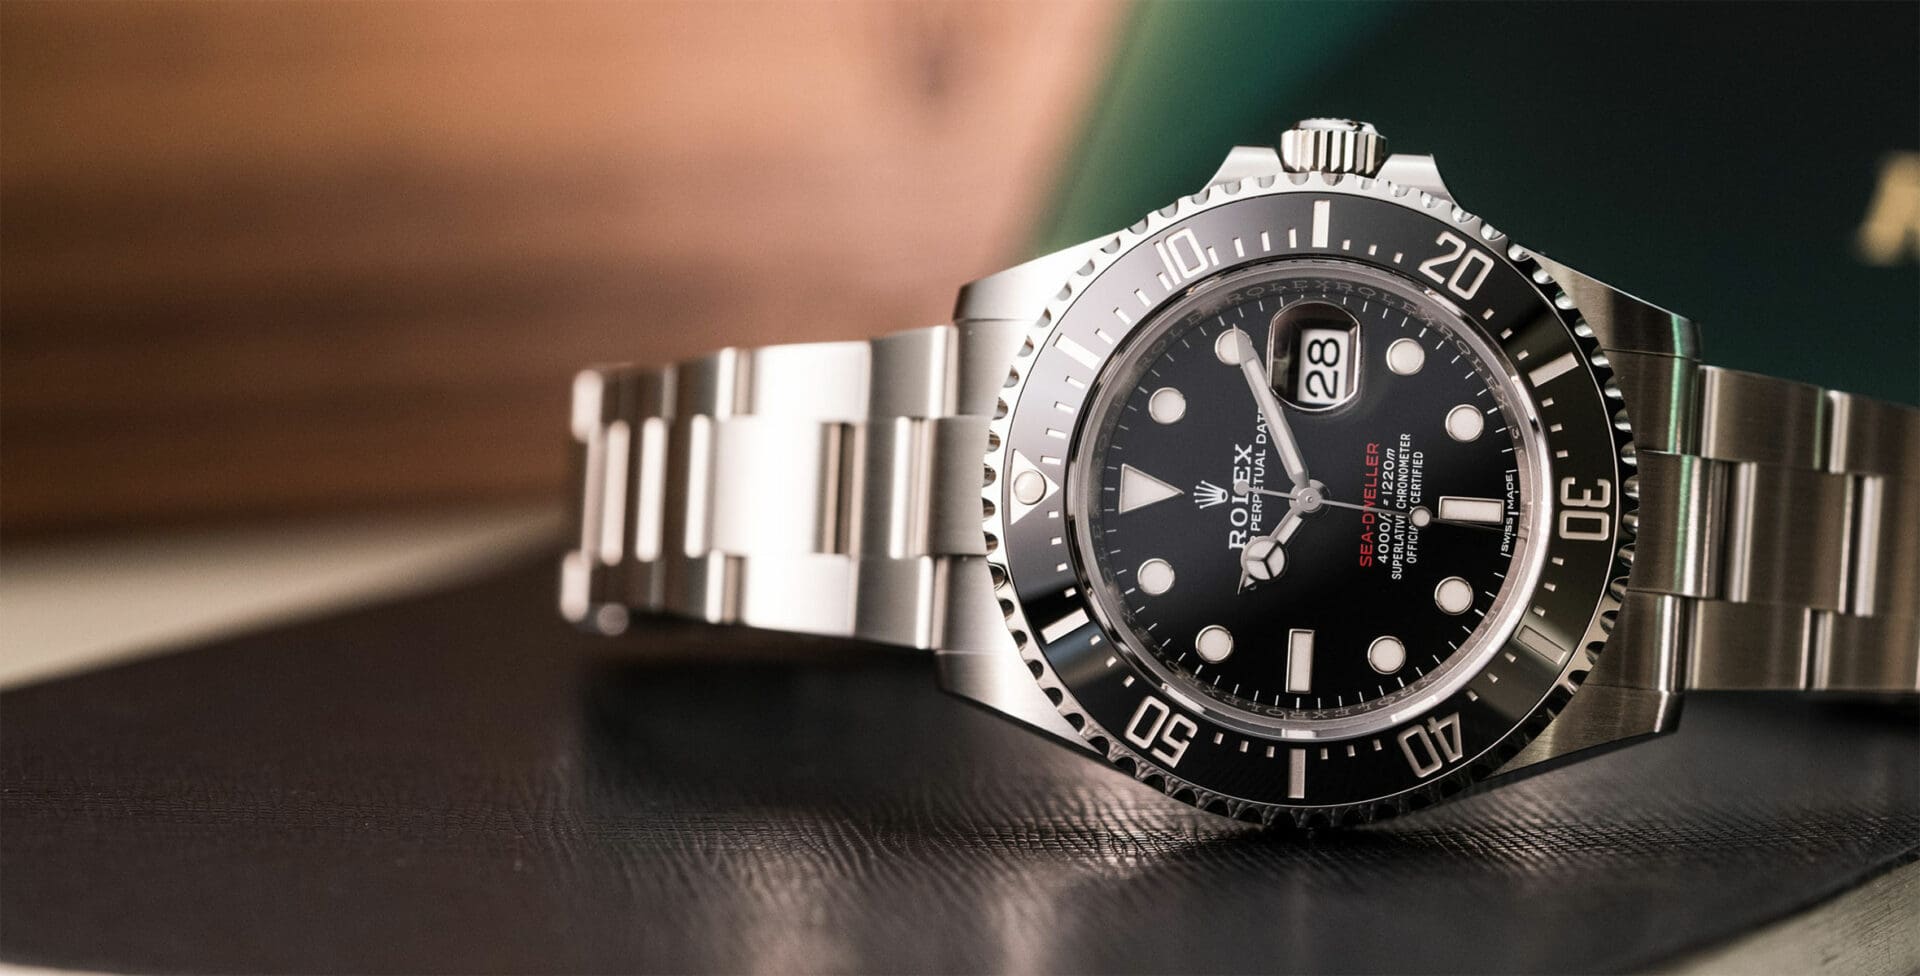 VIDEO: The new Rolex Sea-Dweller (ref. 126600) – live on the wrist